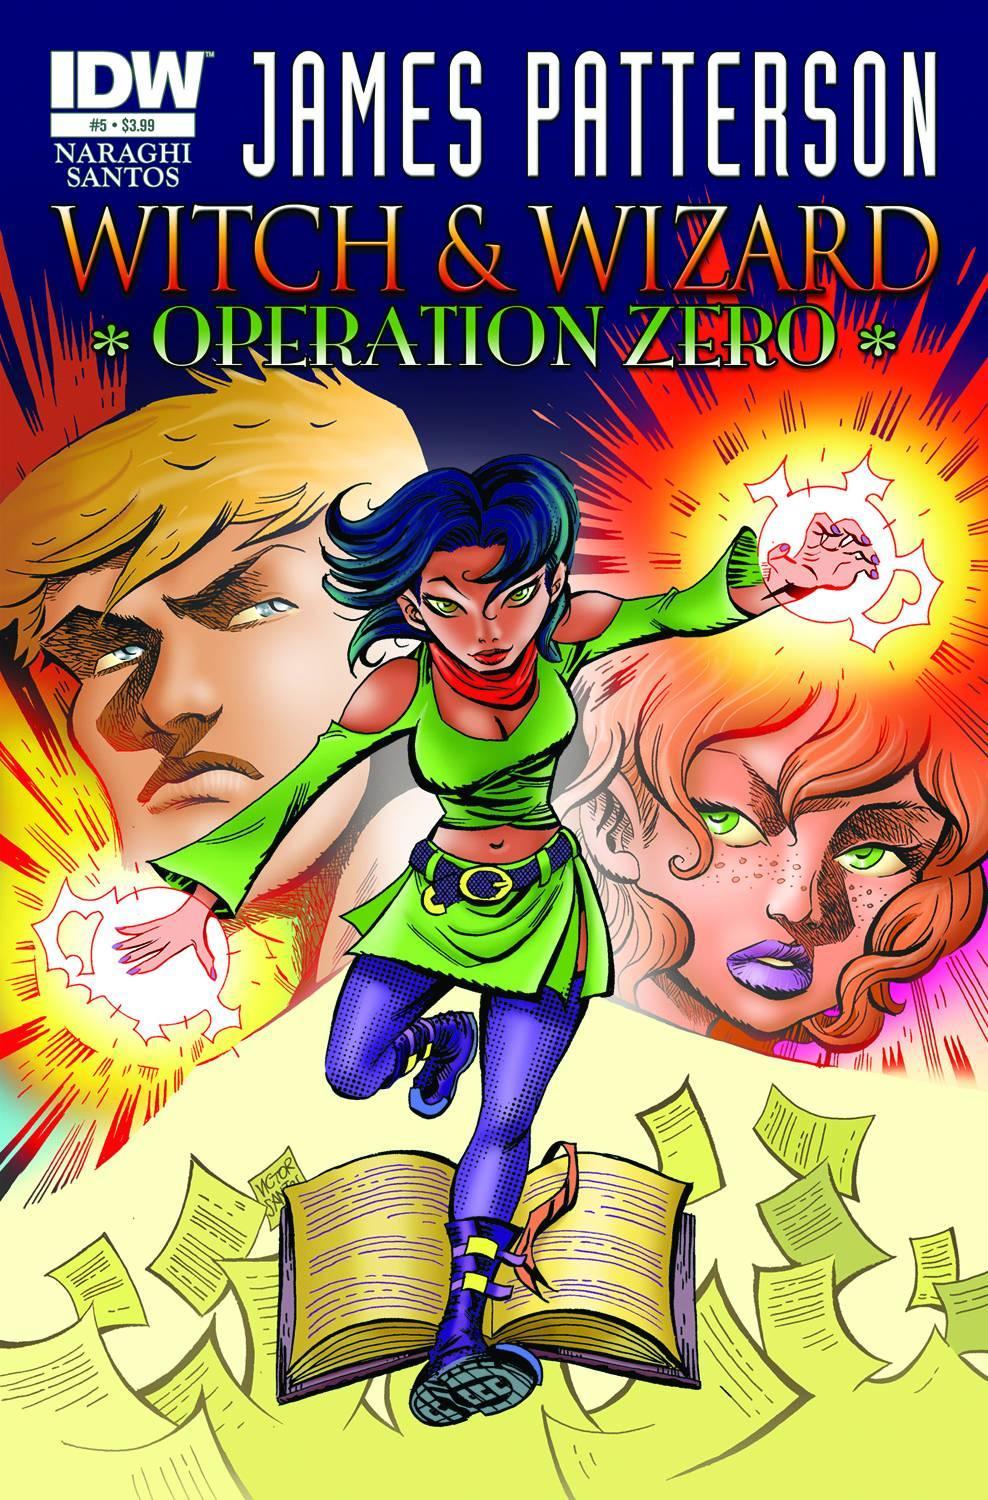 JAMES PATTERSONS WITCH & WIZARD #5 OPERATION ZERO - Kings Comics